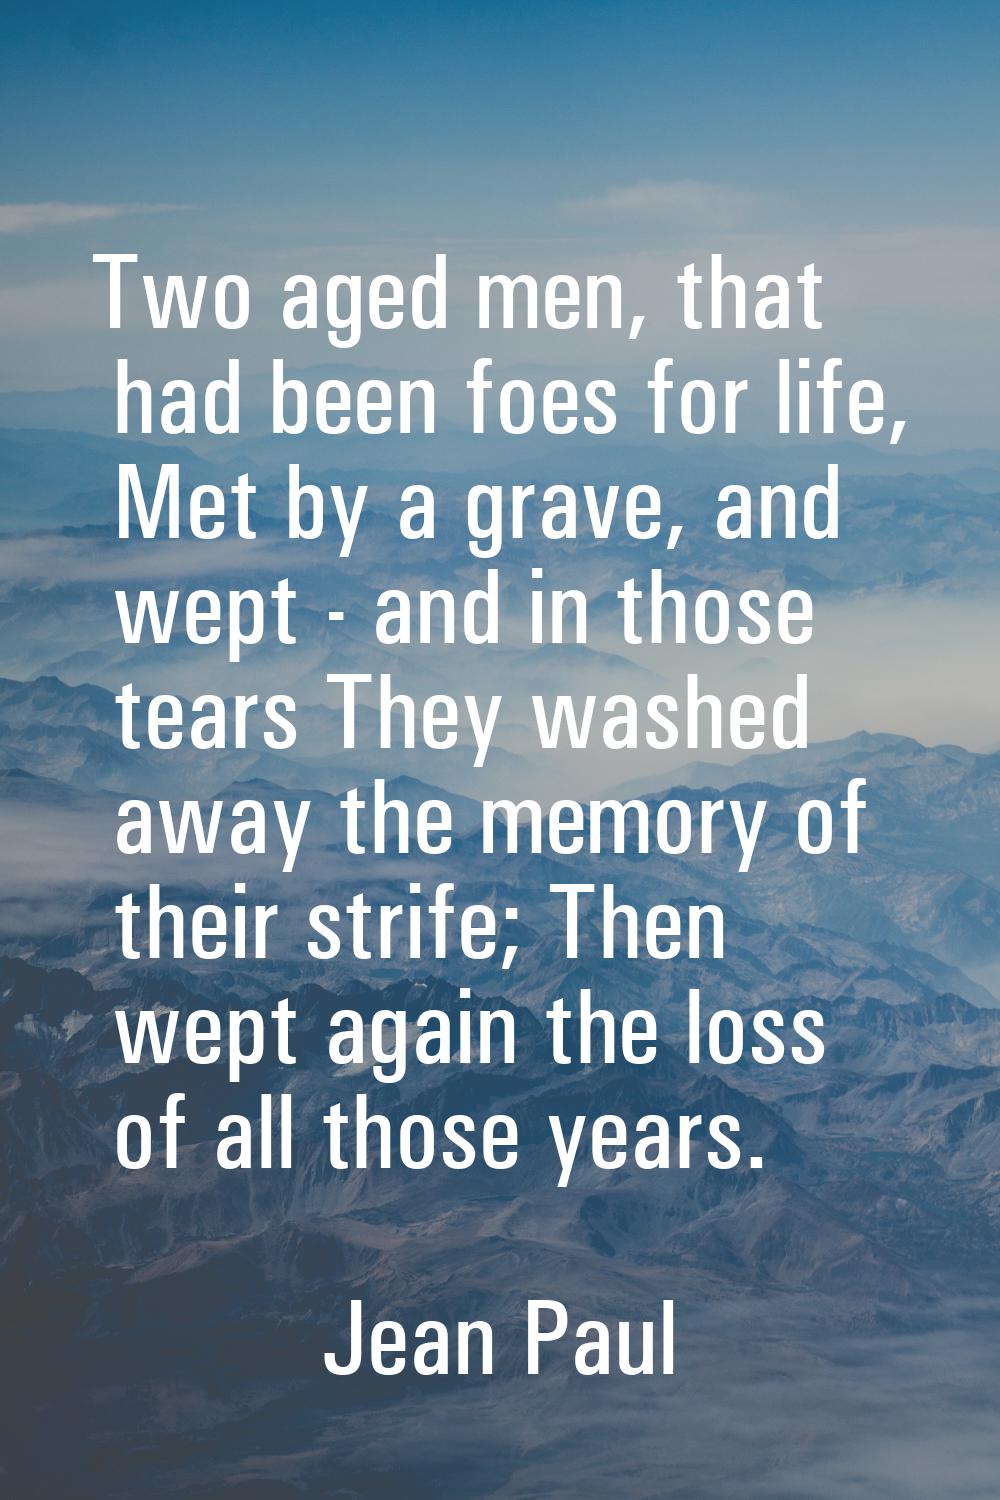 Two aged men, that had been foes for life, Met by a grave, and wept - and in those tears They washe